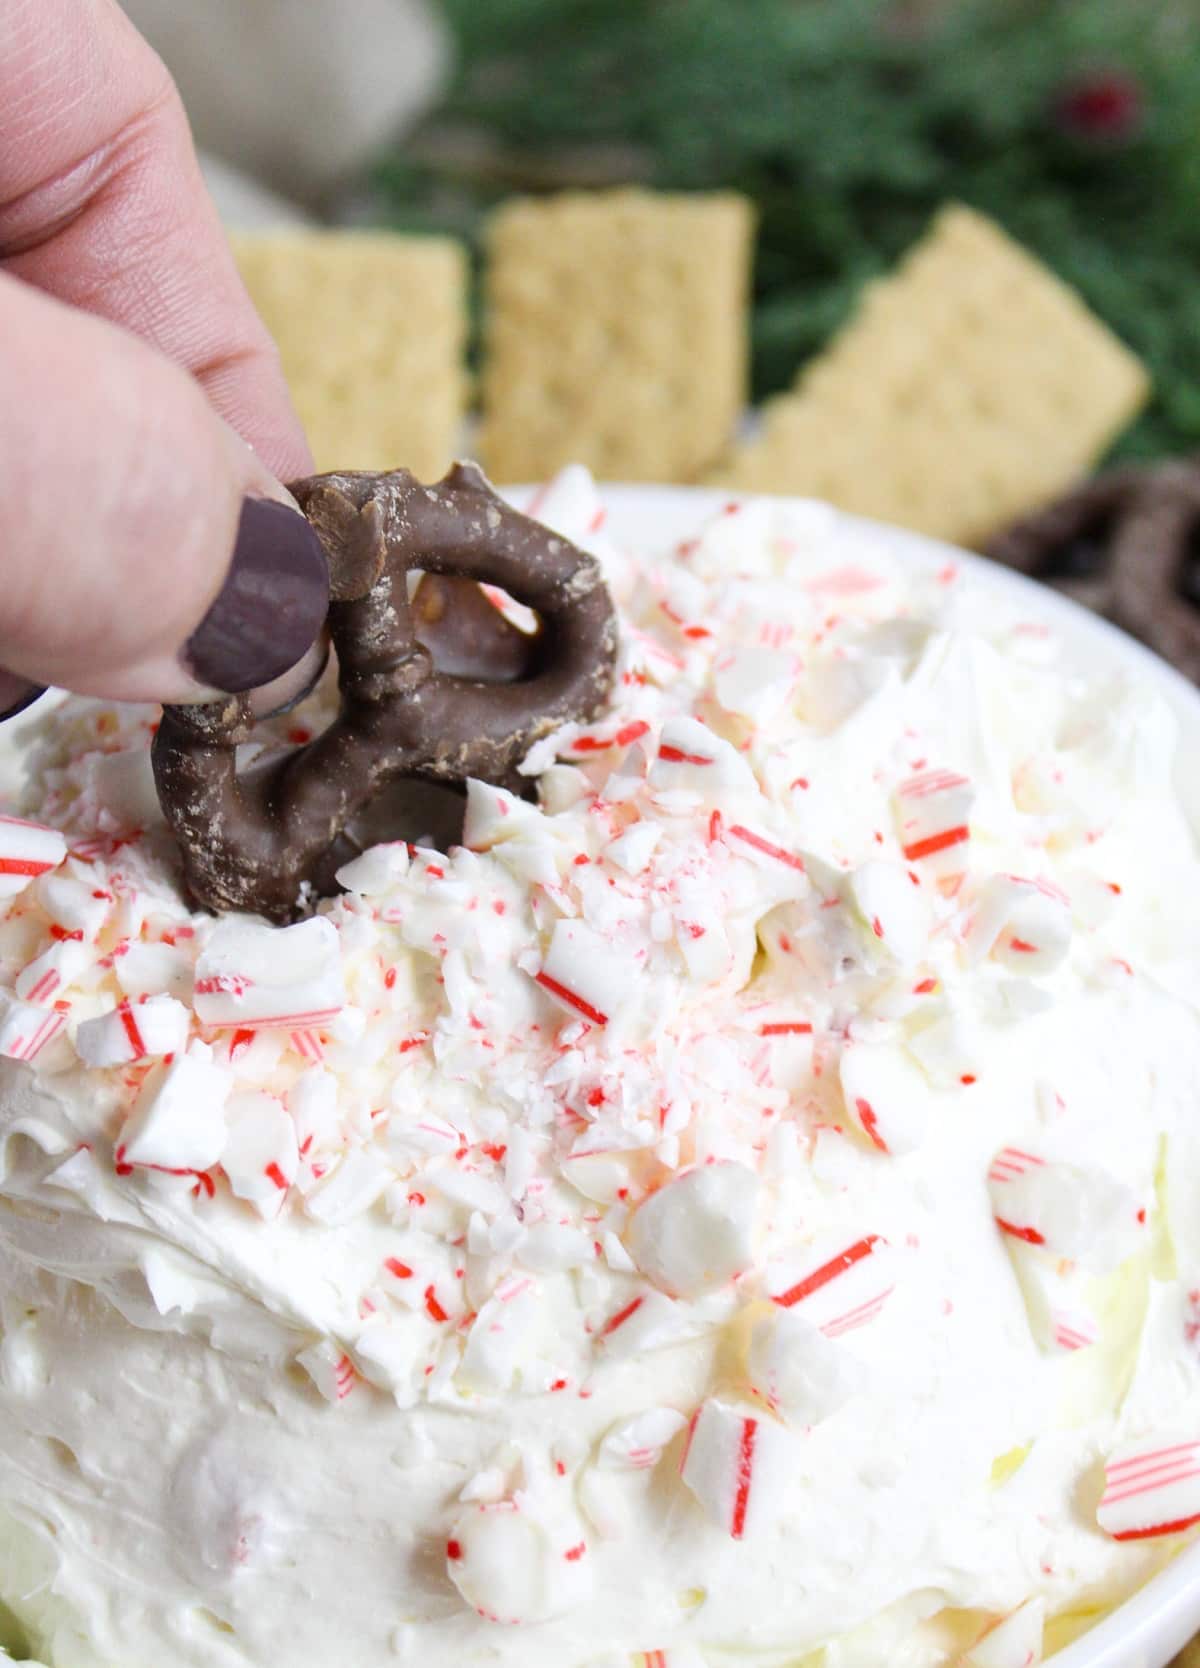 creamy white dip in a white bowl topped with crushed candy canes and surrounded by chocolate covered pretzels. A chocolate pretzel is dipped into the dip.